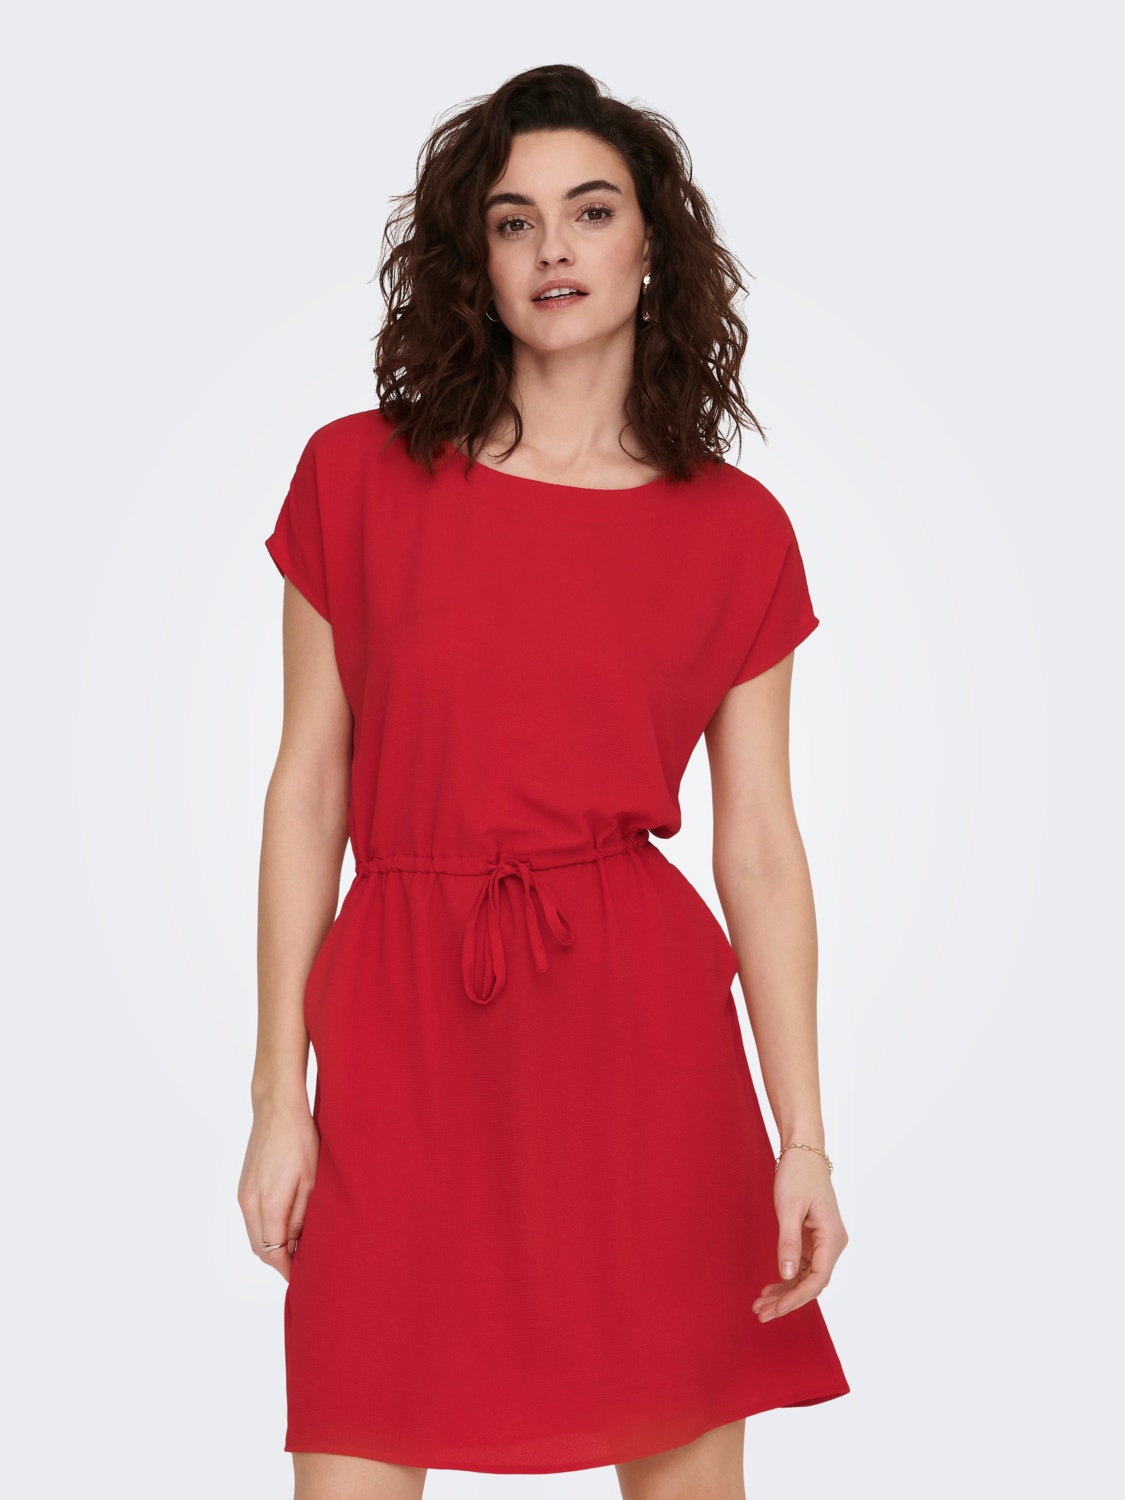 ONLY mini Dress With Cut Out Details -Mars Red - 15199990